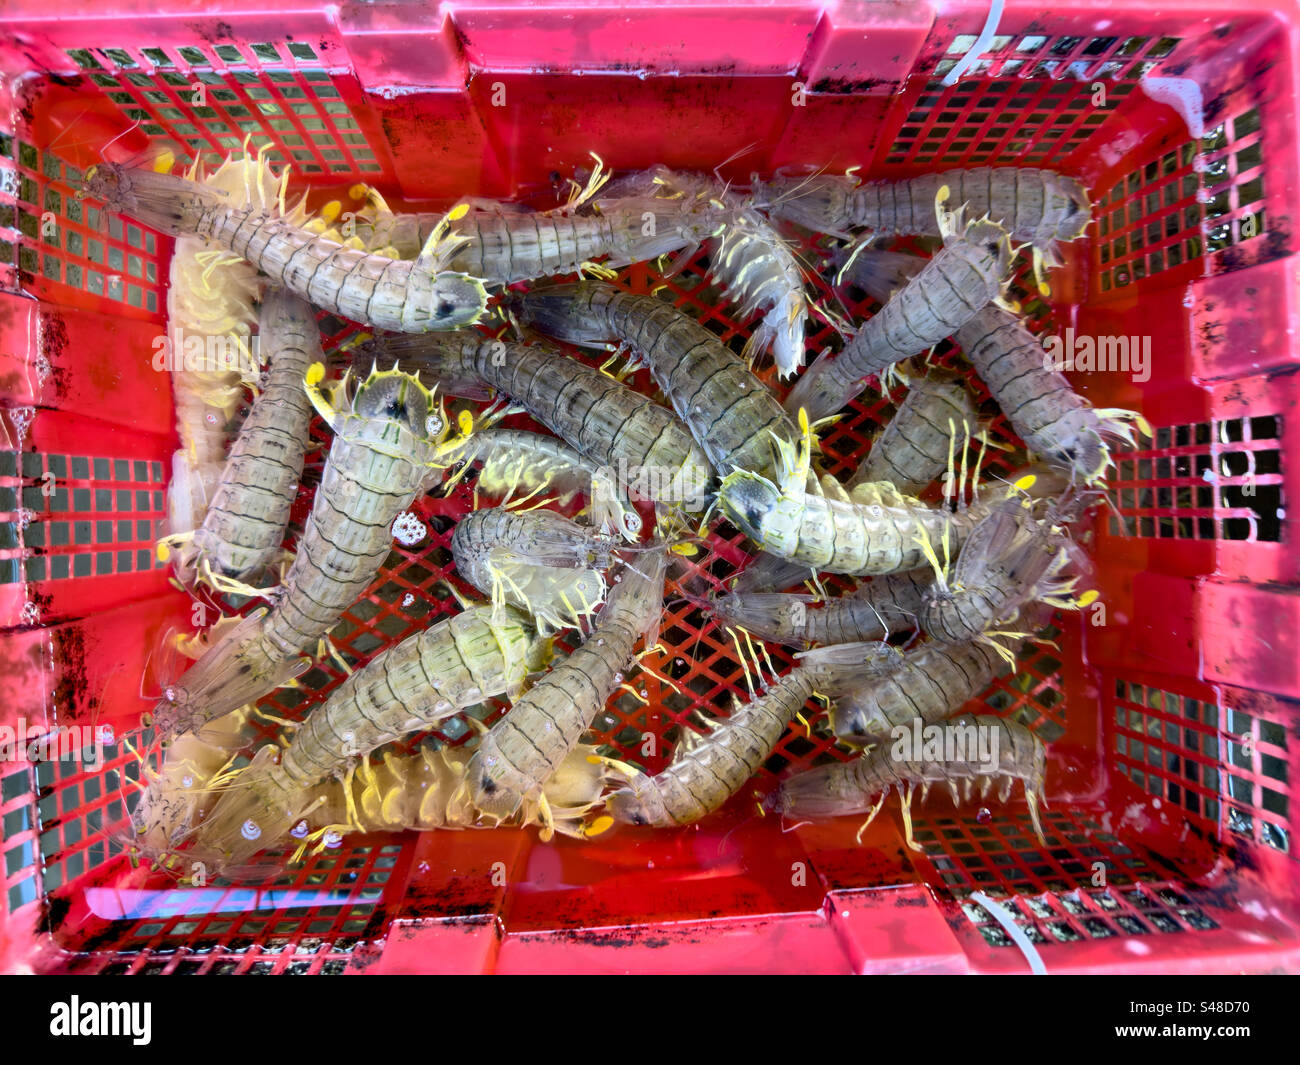 Basket of live shrimp from the south China seas at the local market in Hong Kong Stock Photo